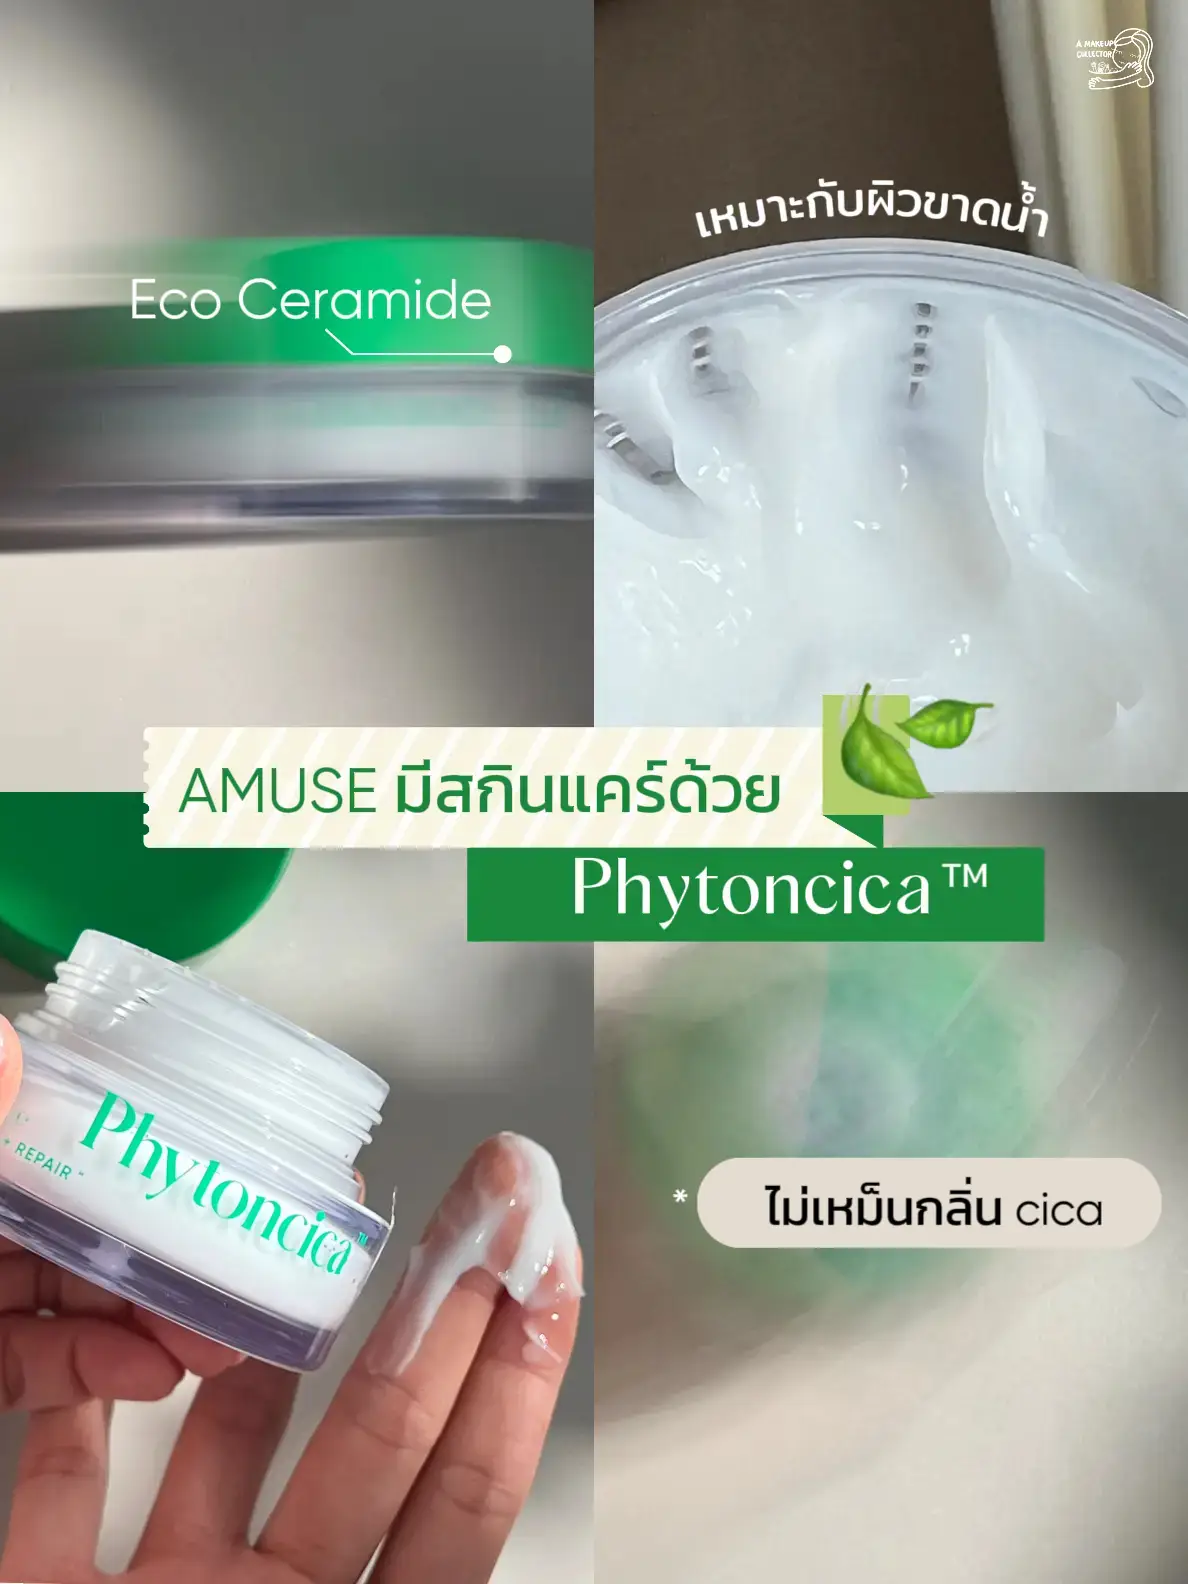 AMUSE has a Skin Care with Phytoncica